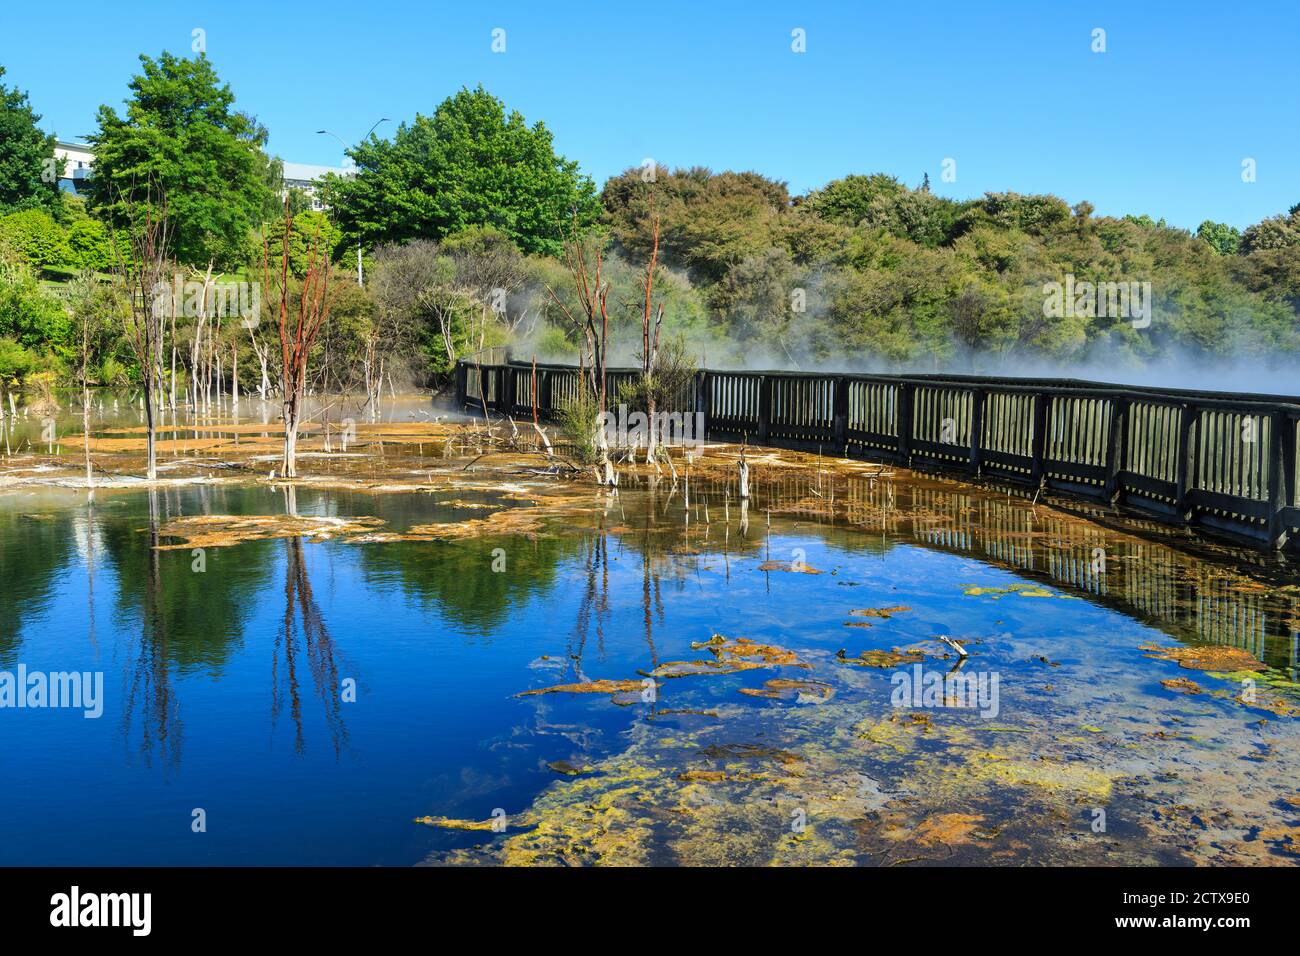 A geothermal lake in Kuirau Park, Rotorua, New Zealand, with a walkway crossing it. One side is steaming hot and the other is full of colorful algae Stock Photo